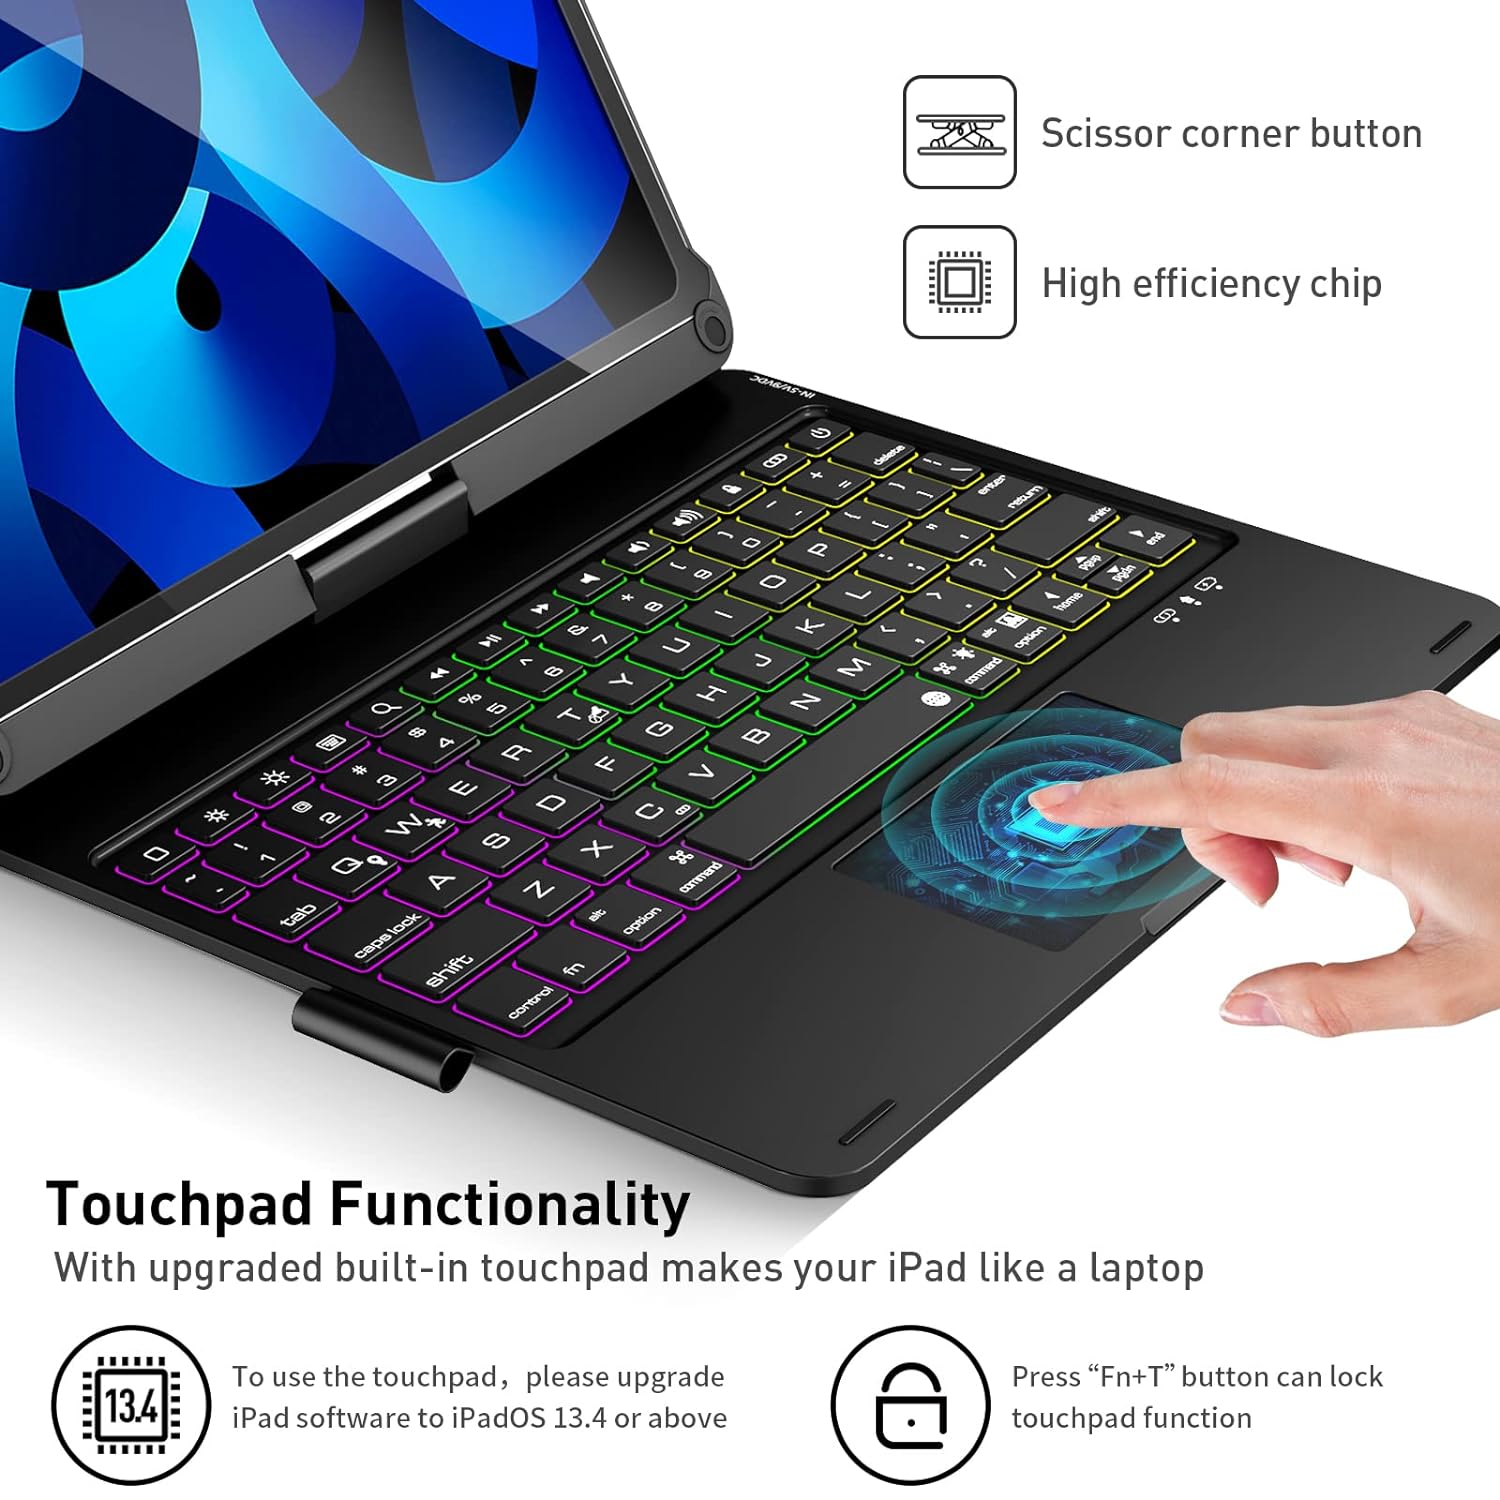 iPad Keyboard Case with Touchpad for iPad Air 4 10.9 inch 2020, iPad Pro 11 inch 2nd 2020 & 1st 2018, Rainbow Backlights, 360 Screen Rotate, with Pencil Holder - Black